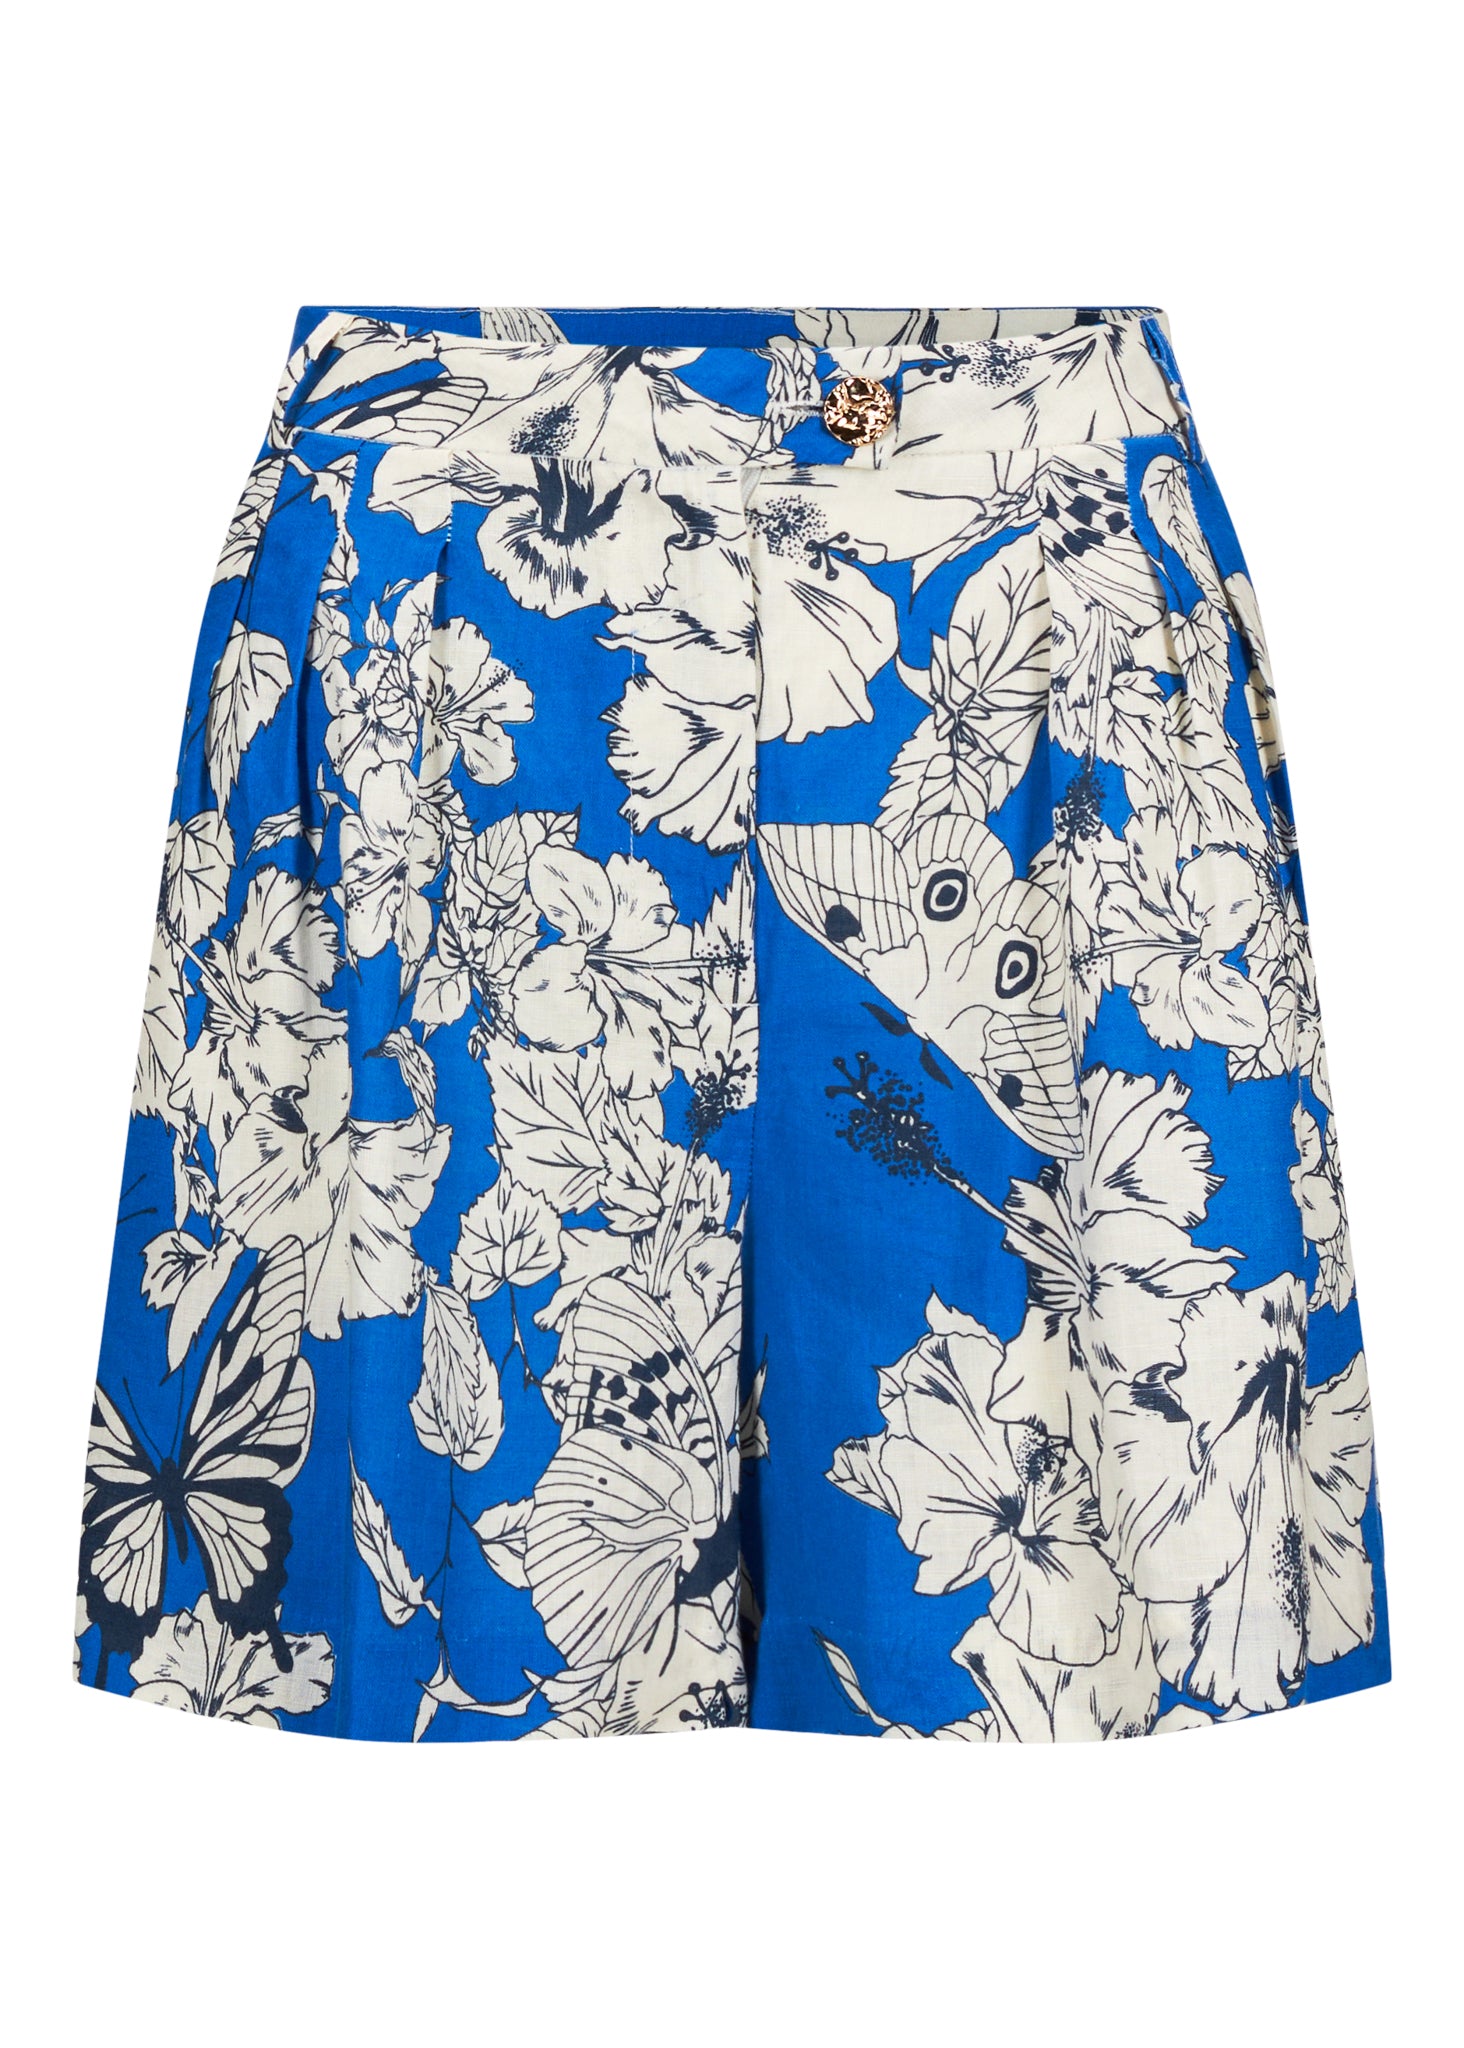 BUTTERFLY VINCENT SHORTS, BLUE